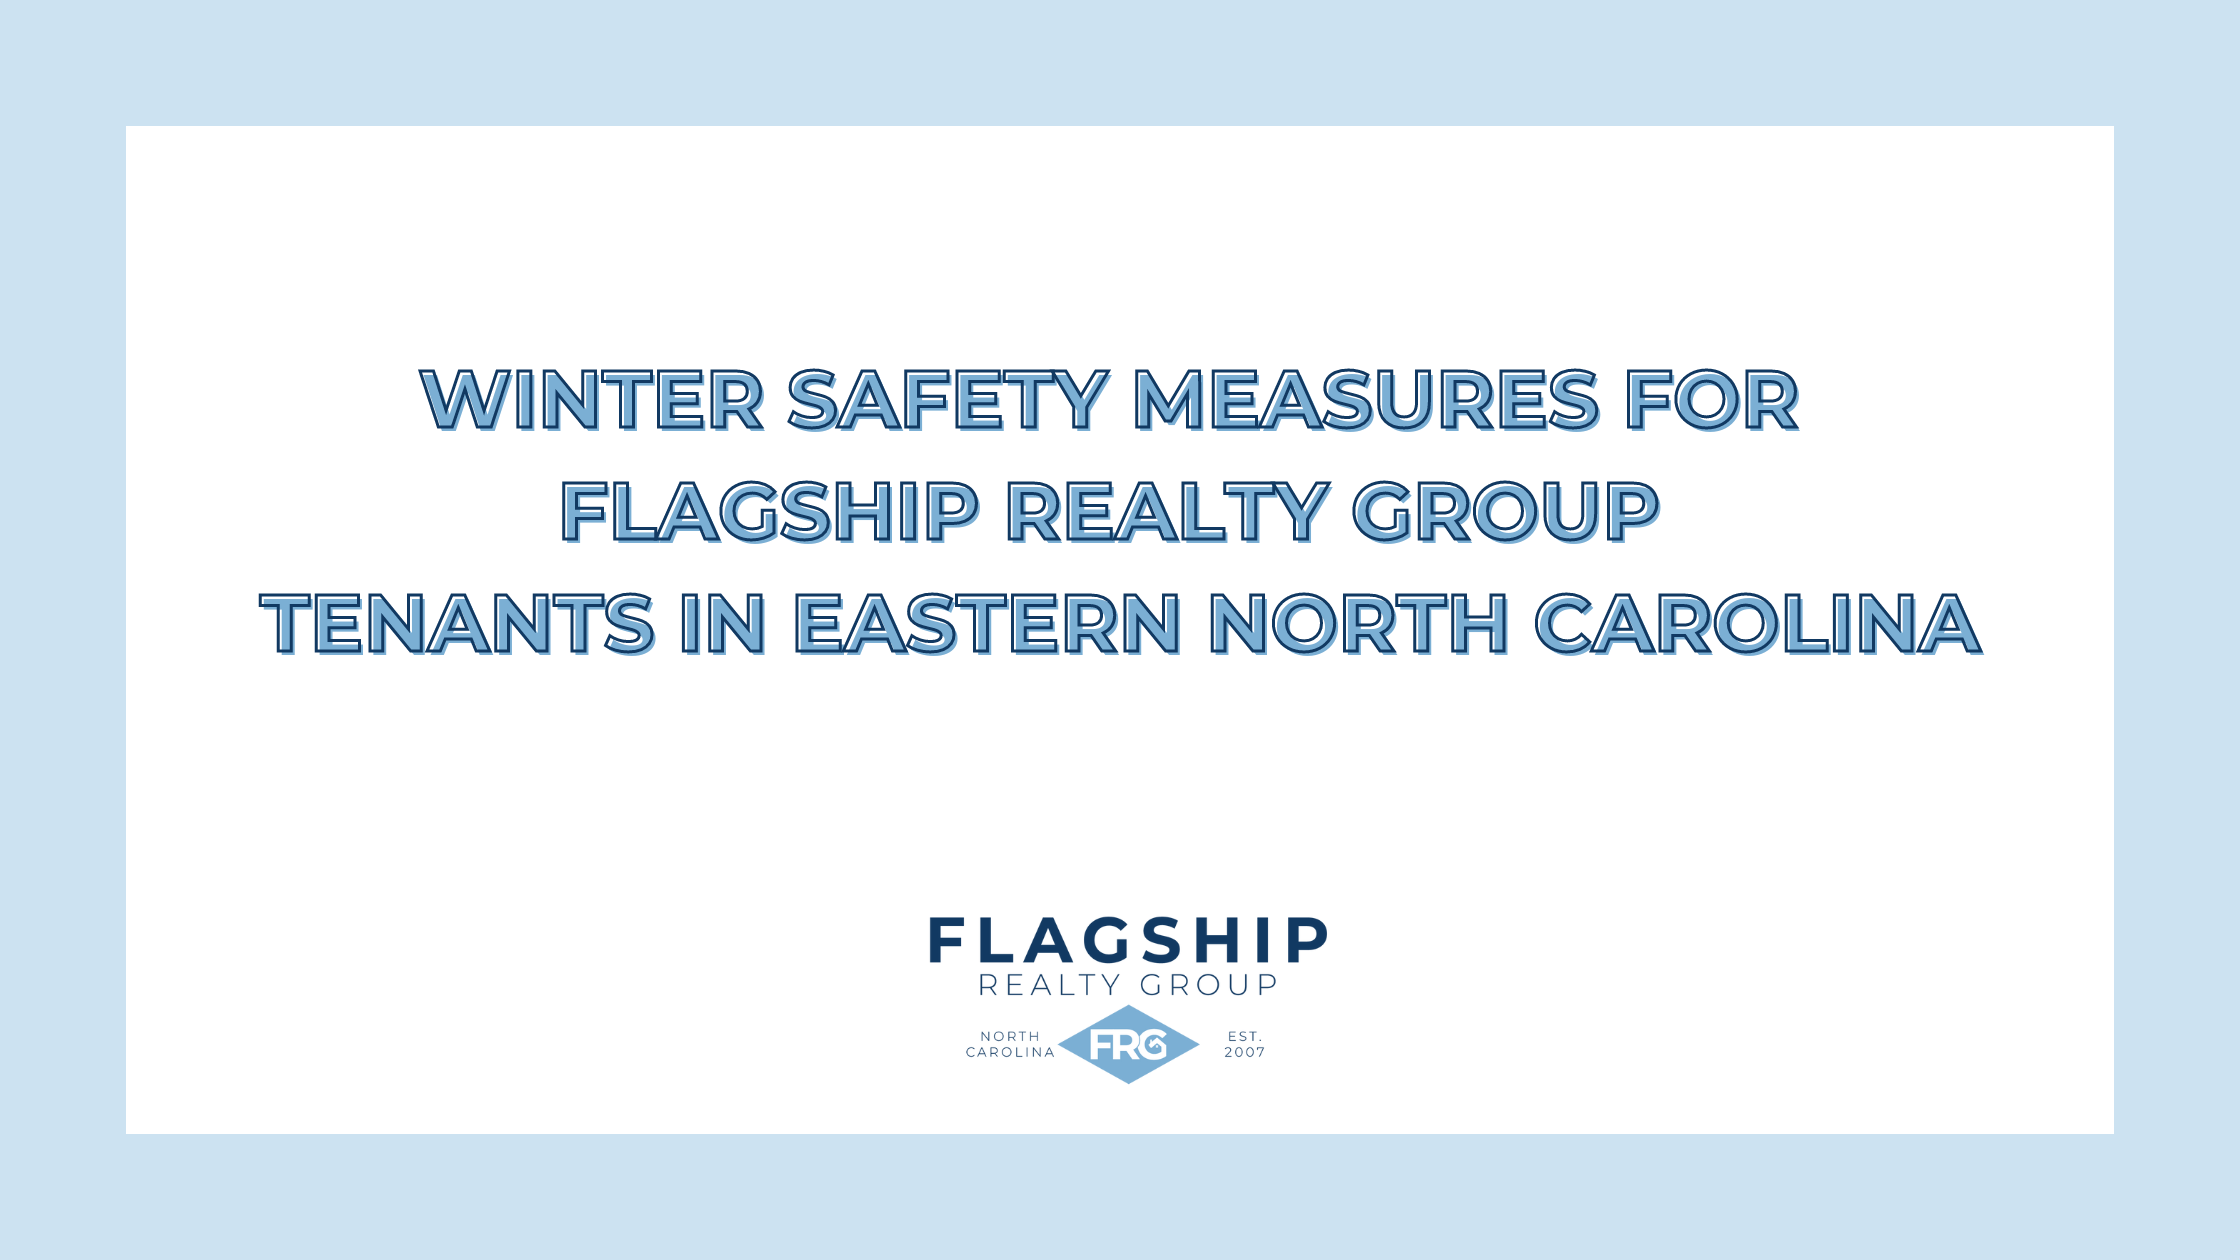 Winter Safety Measures for Flagship Realty Group Tenants in Eastern North Carolina